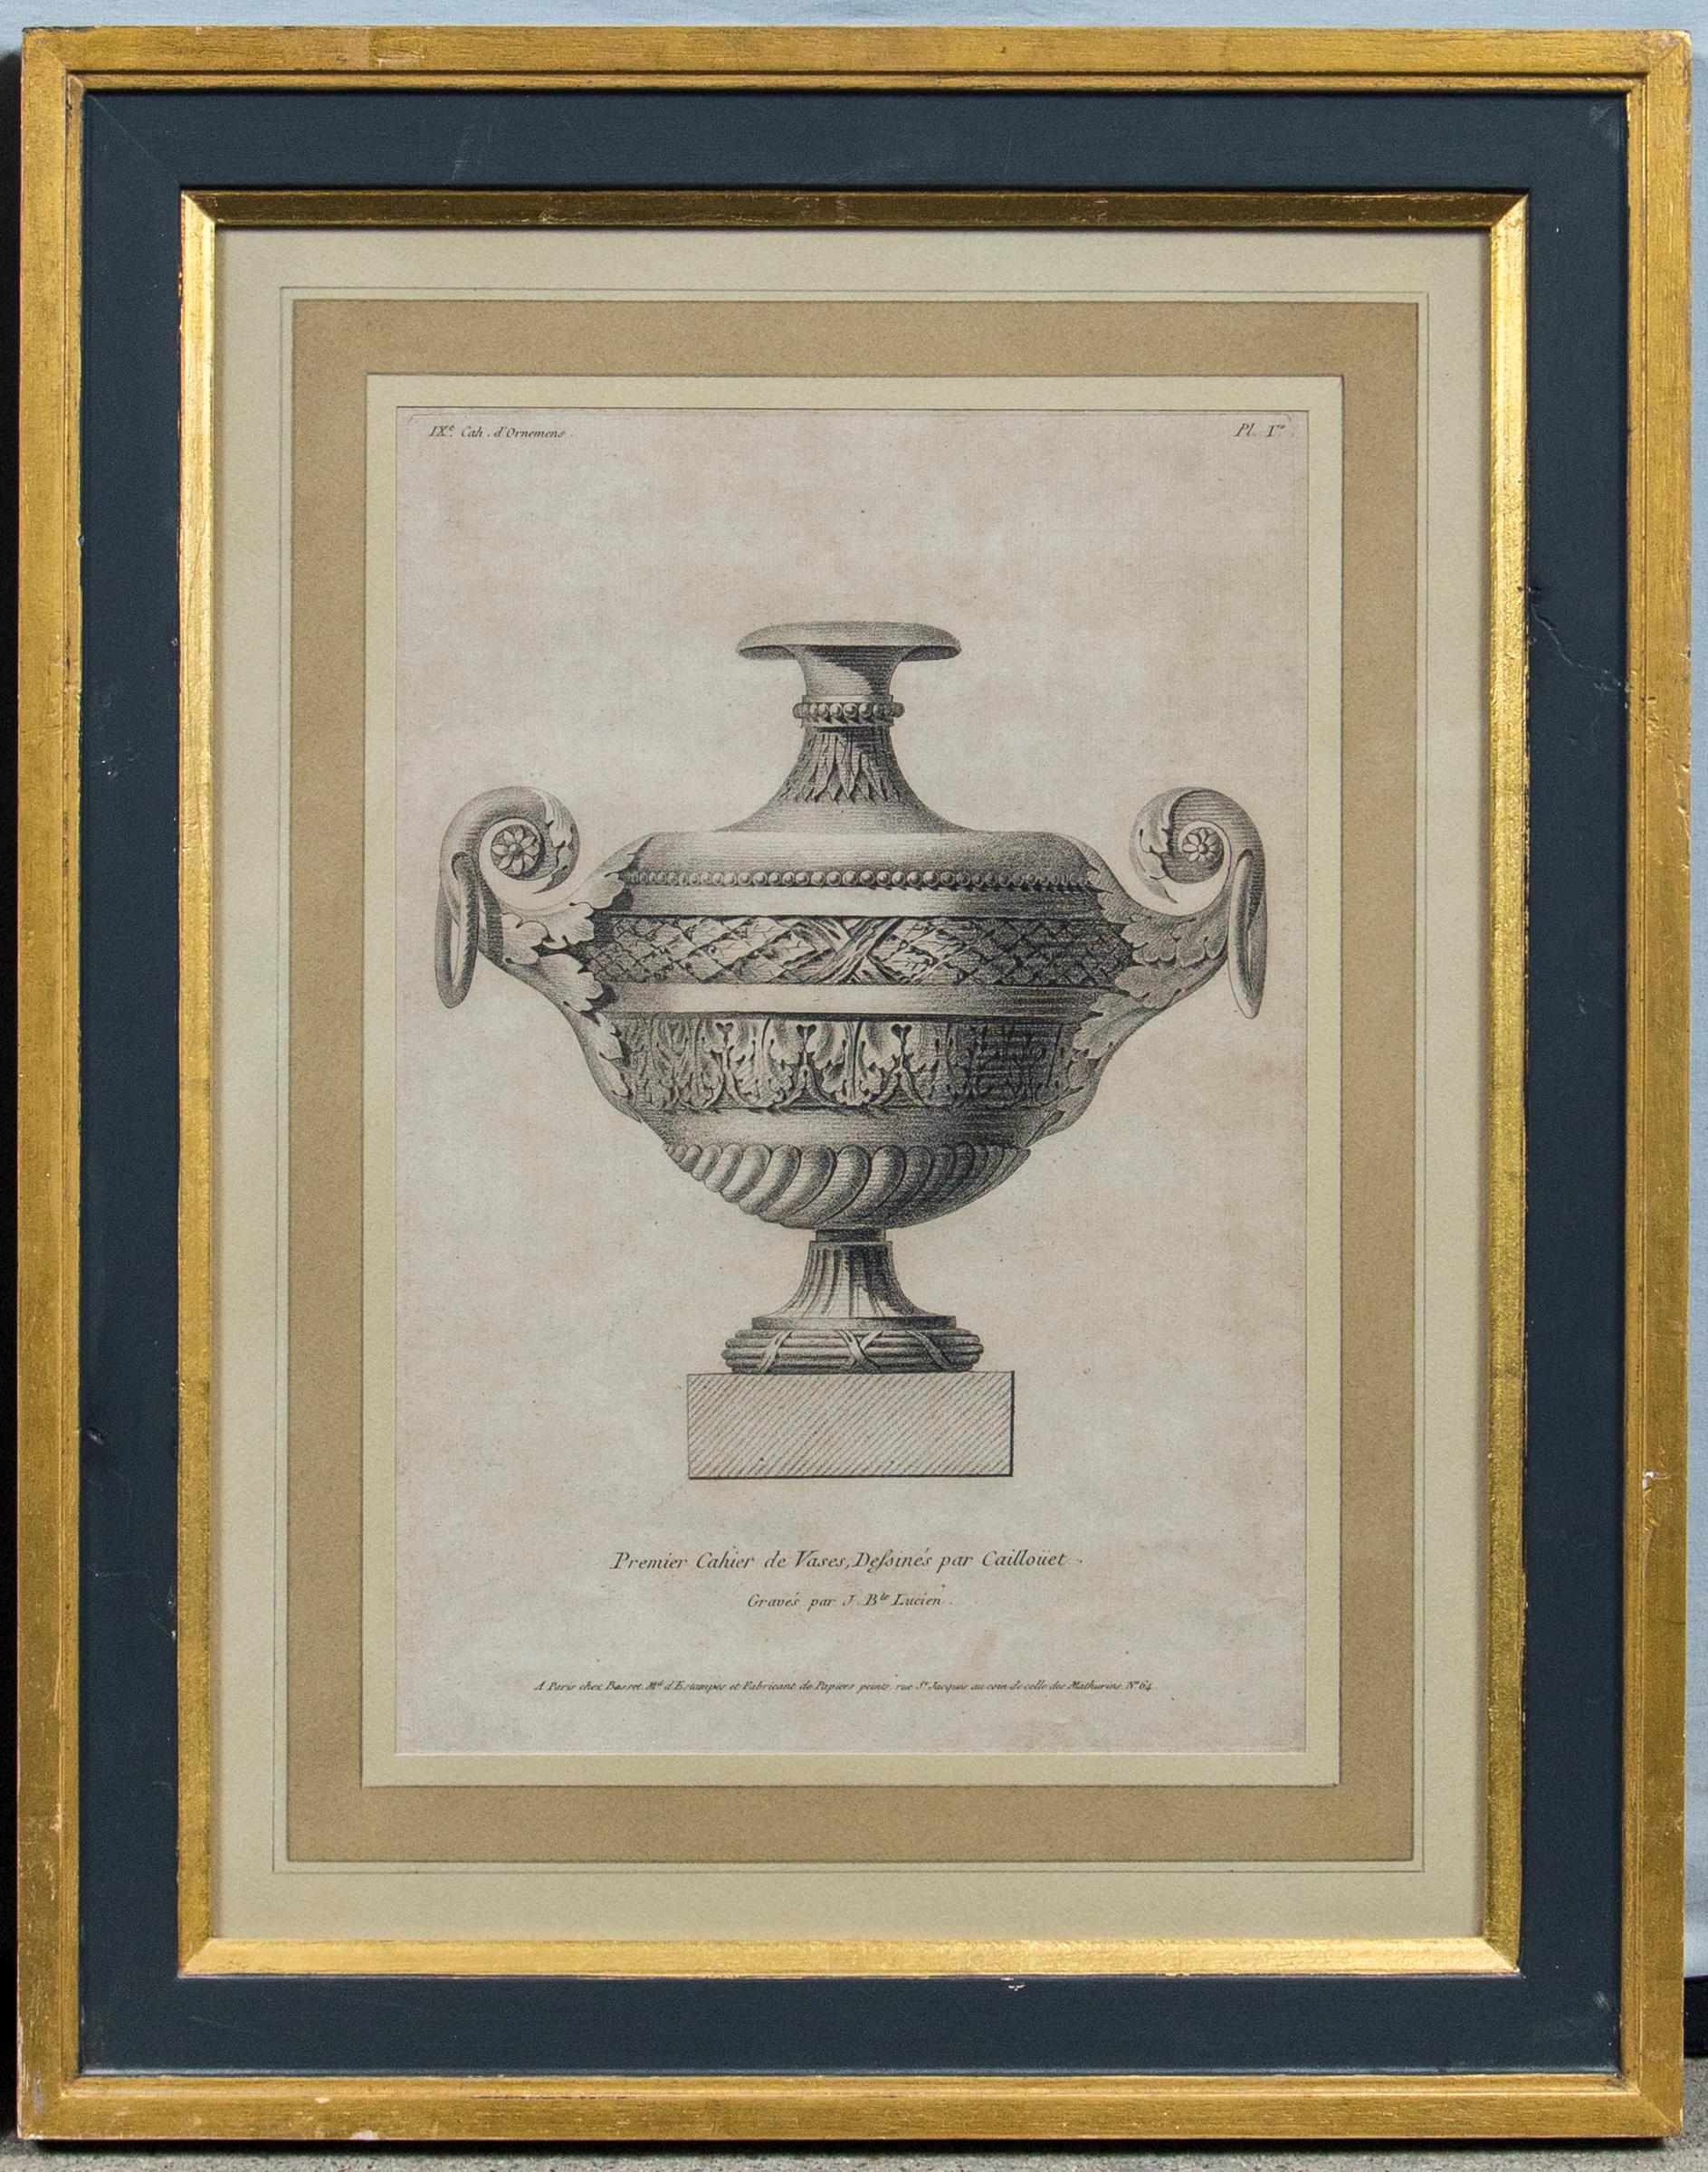 Set of 4 'Vase' Engravings by Andre-Louis Caillouet, France, Late 18th Century For Sale 4